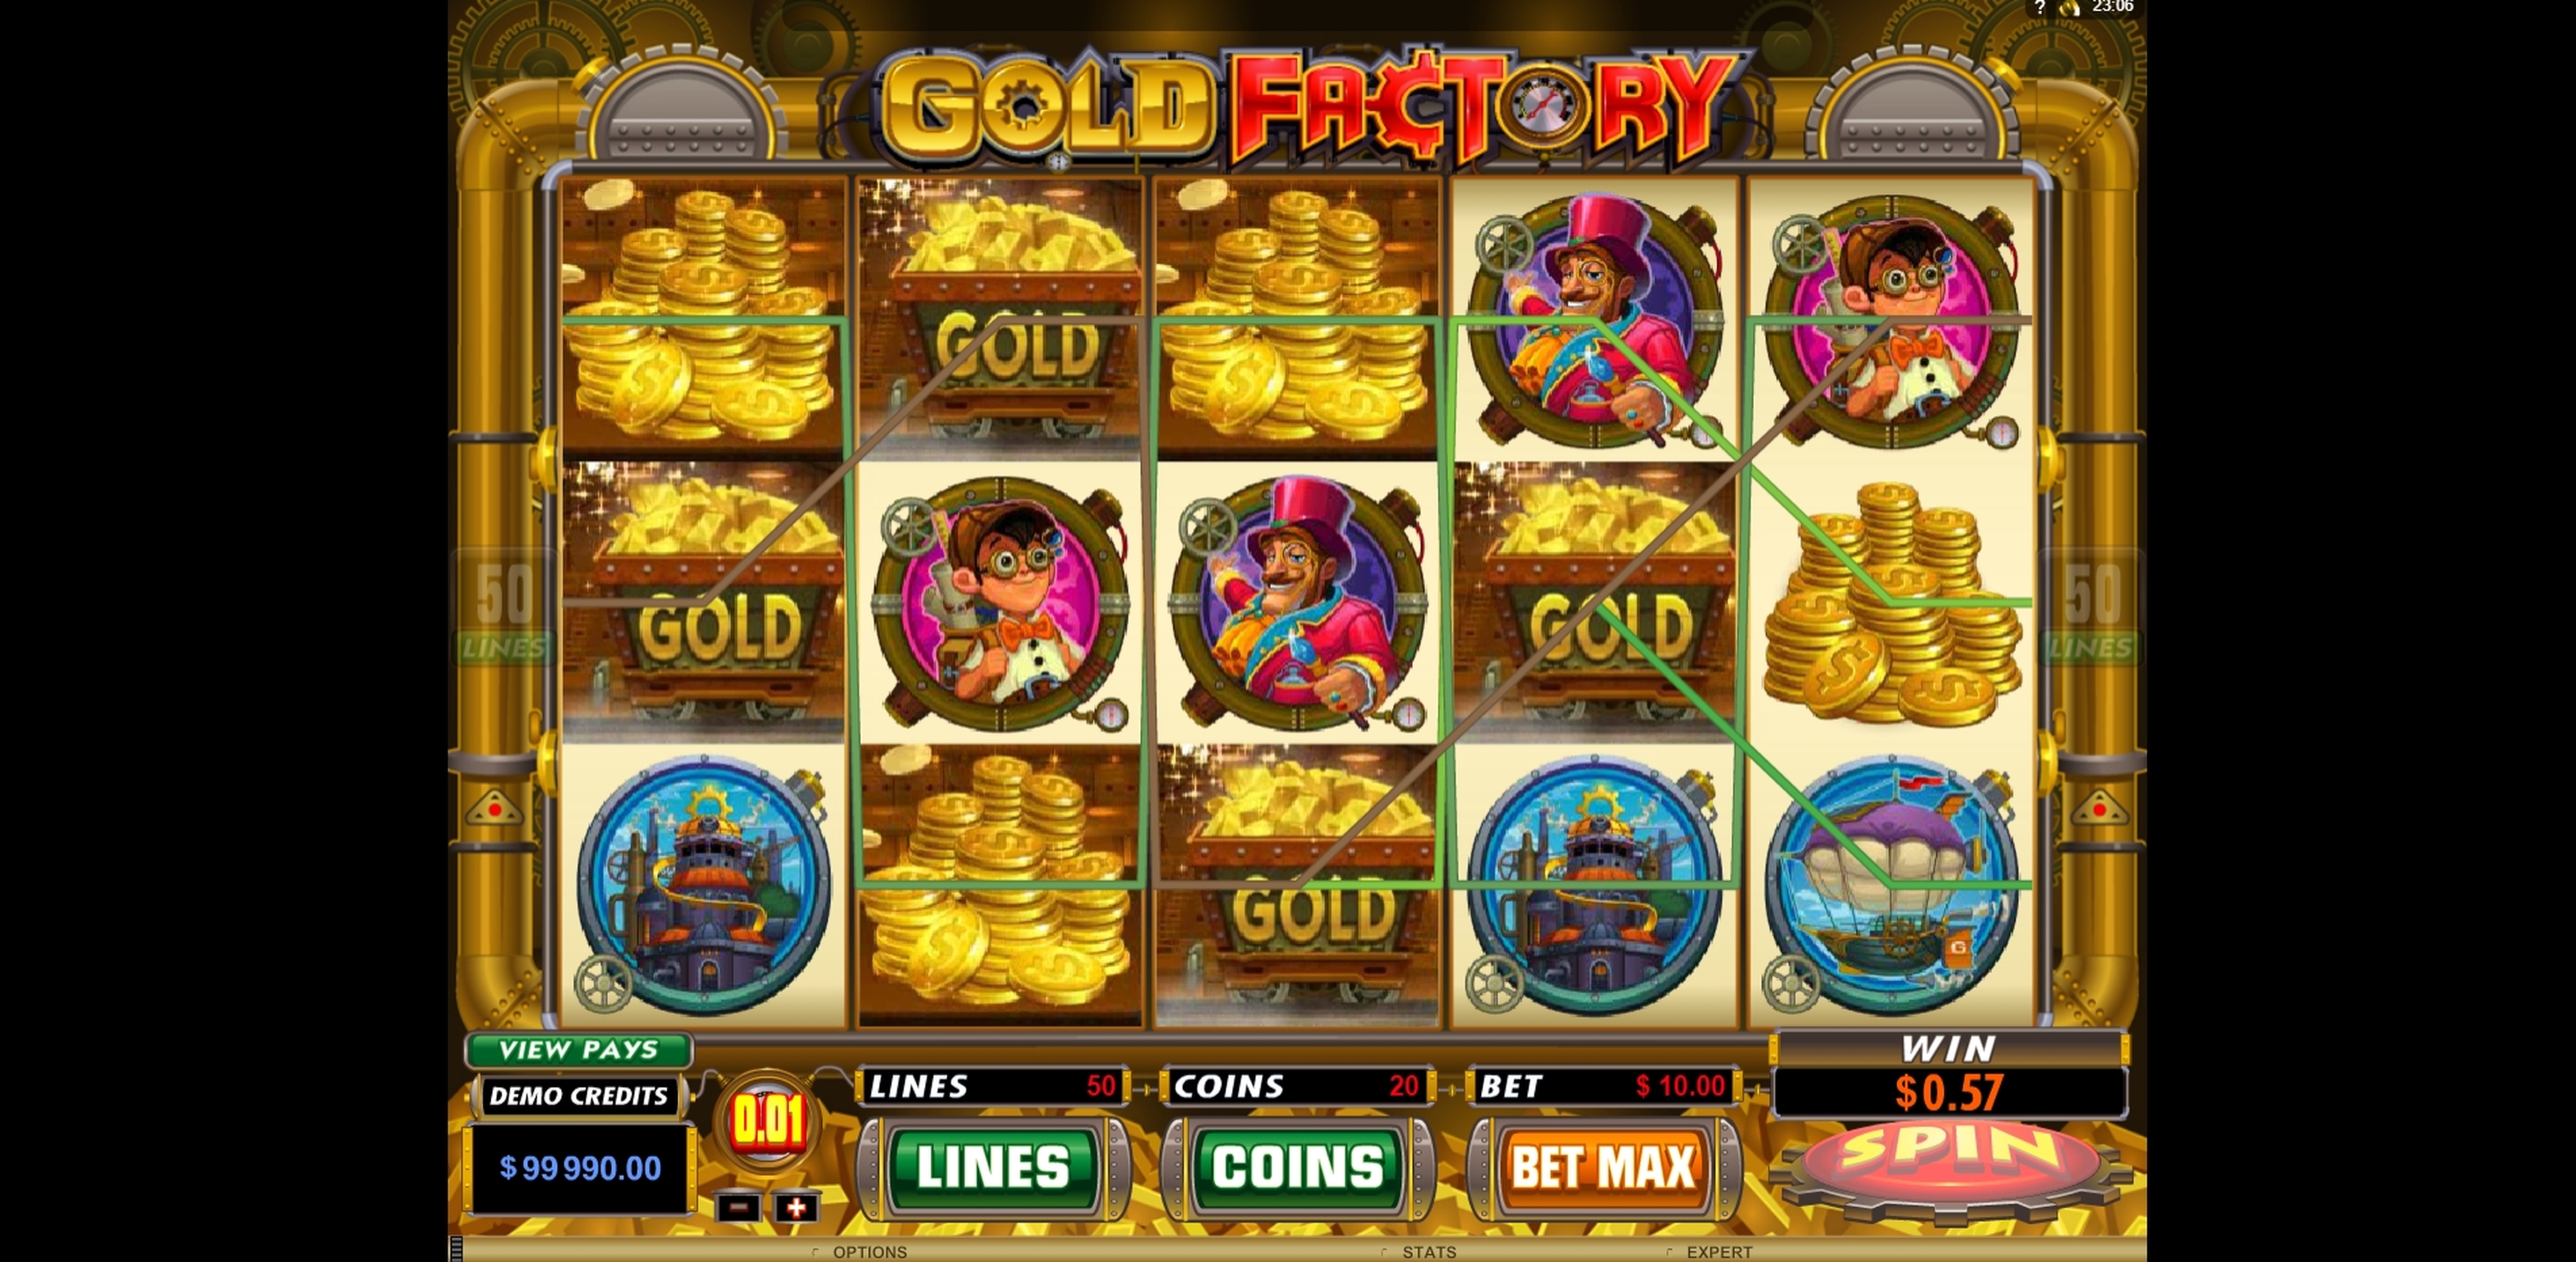 Win Money in Gold Factory Free Slot Game by Microgaming